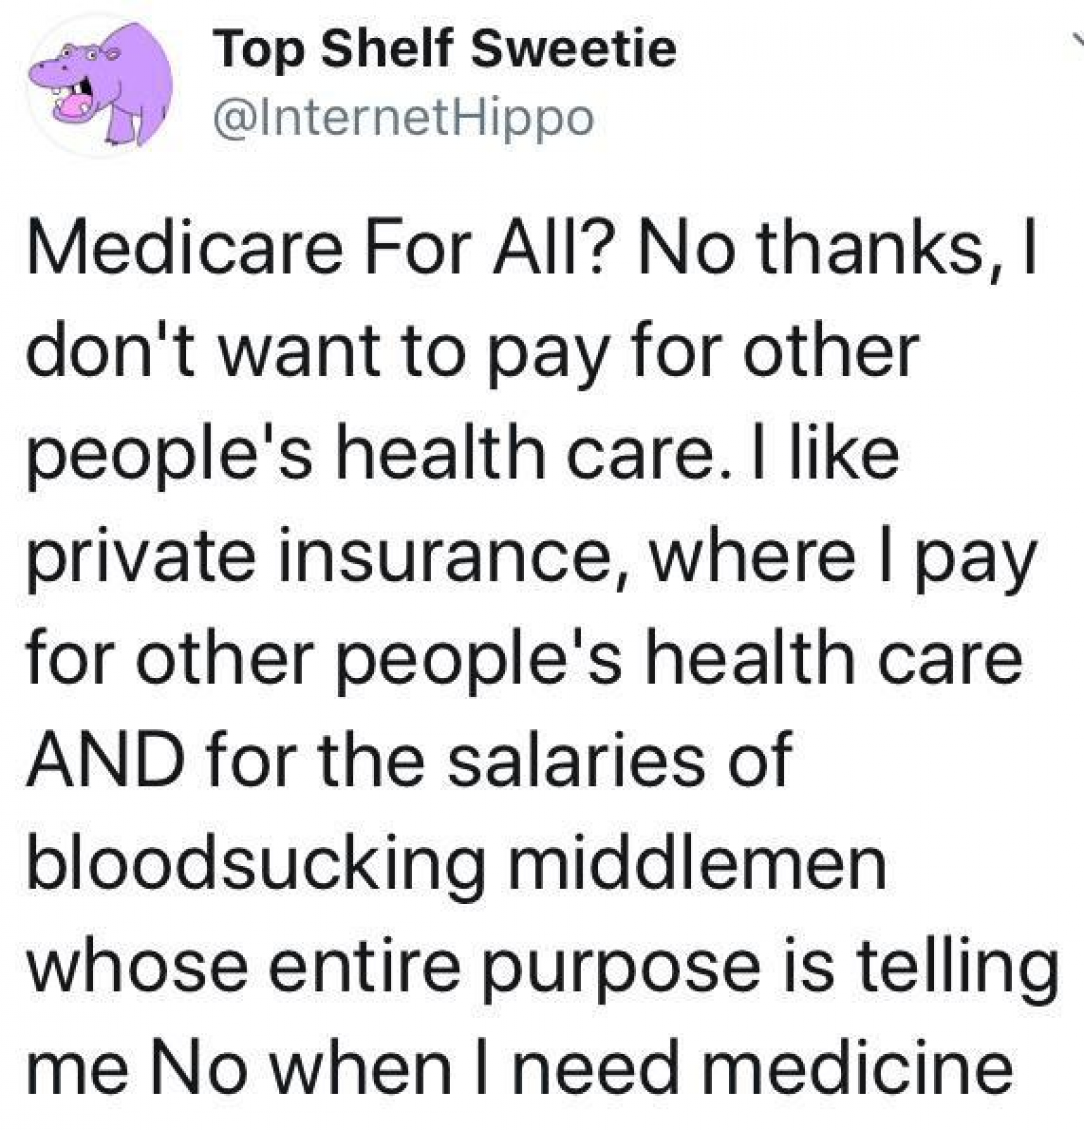 Remind me again, why do we need to tie healthcare to employers?